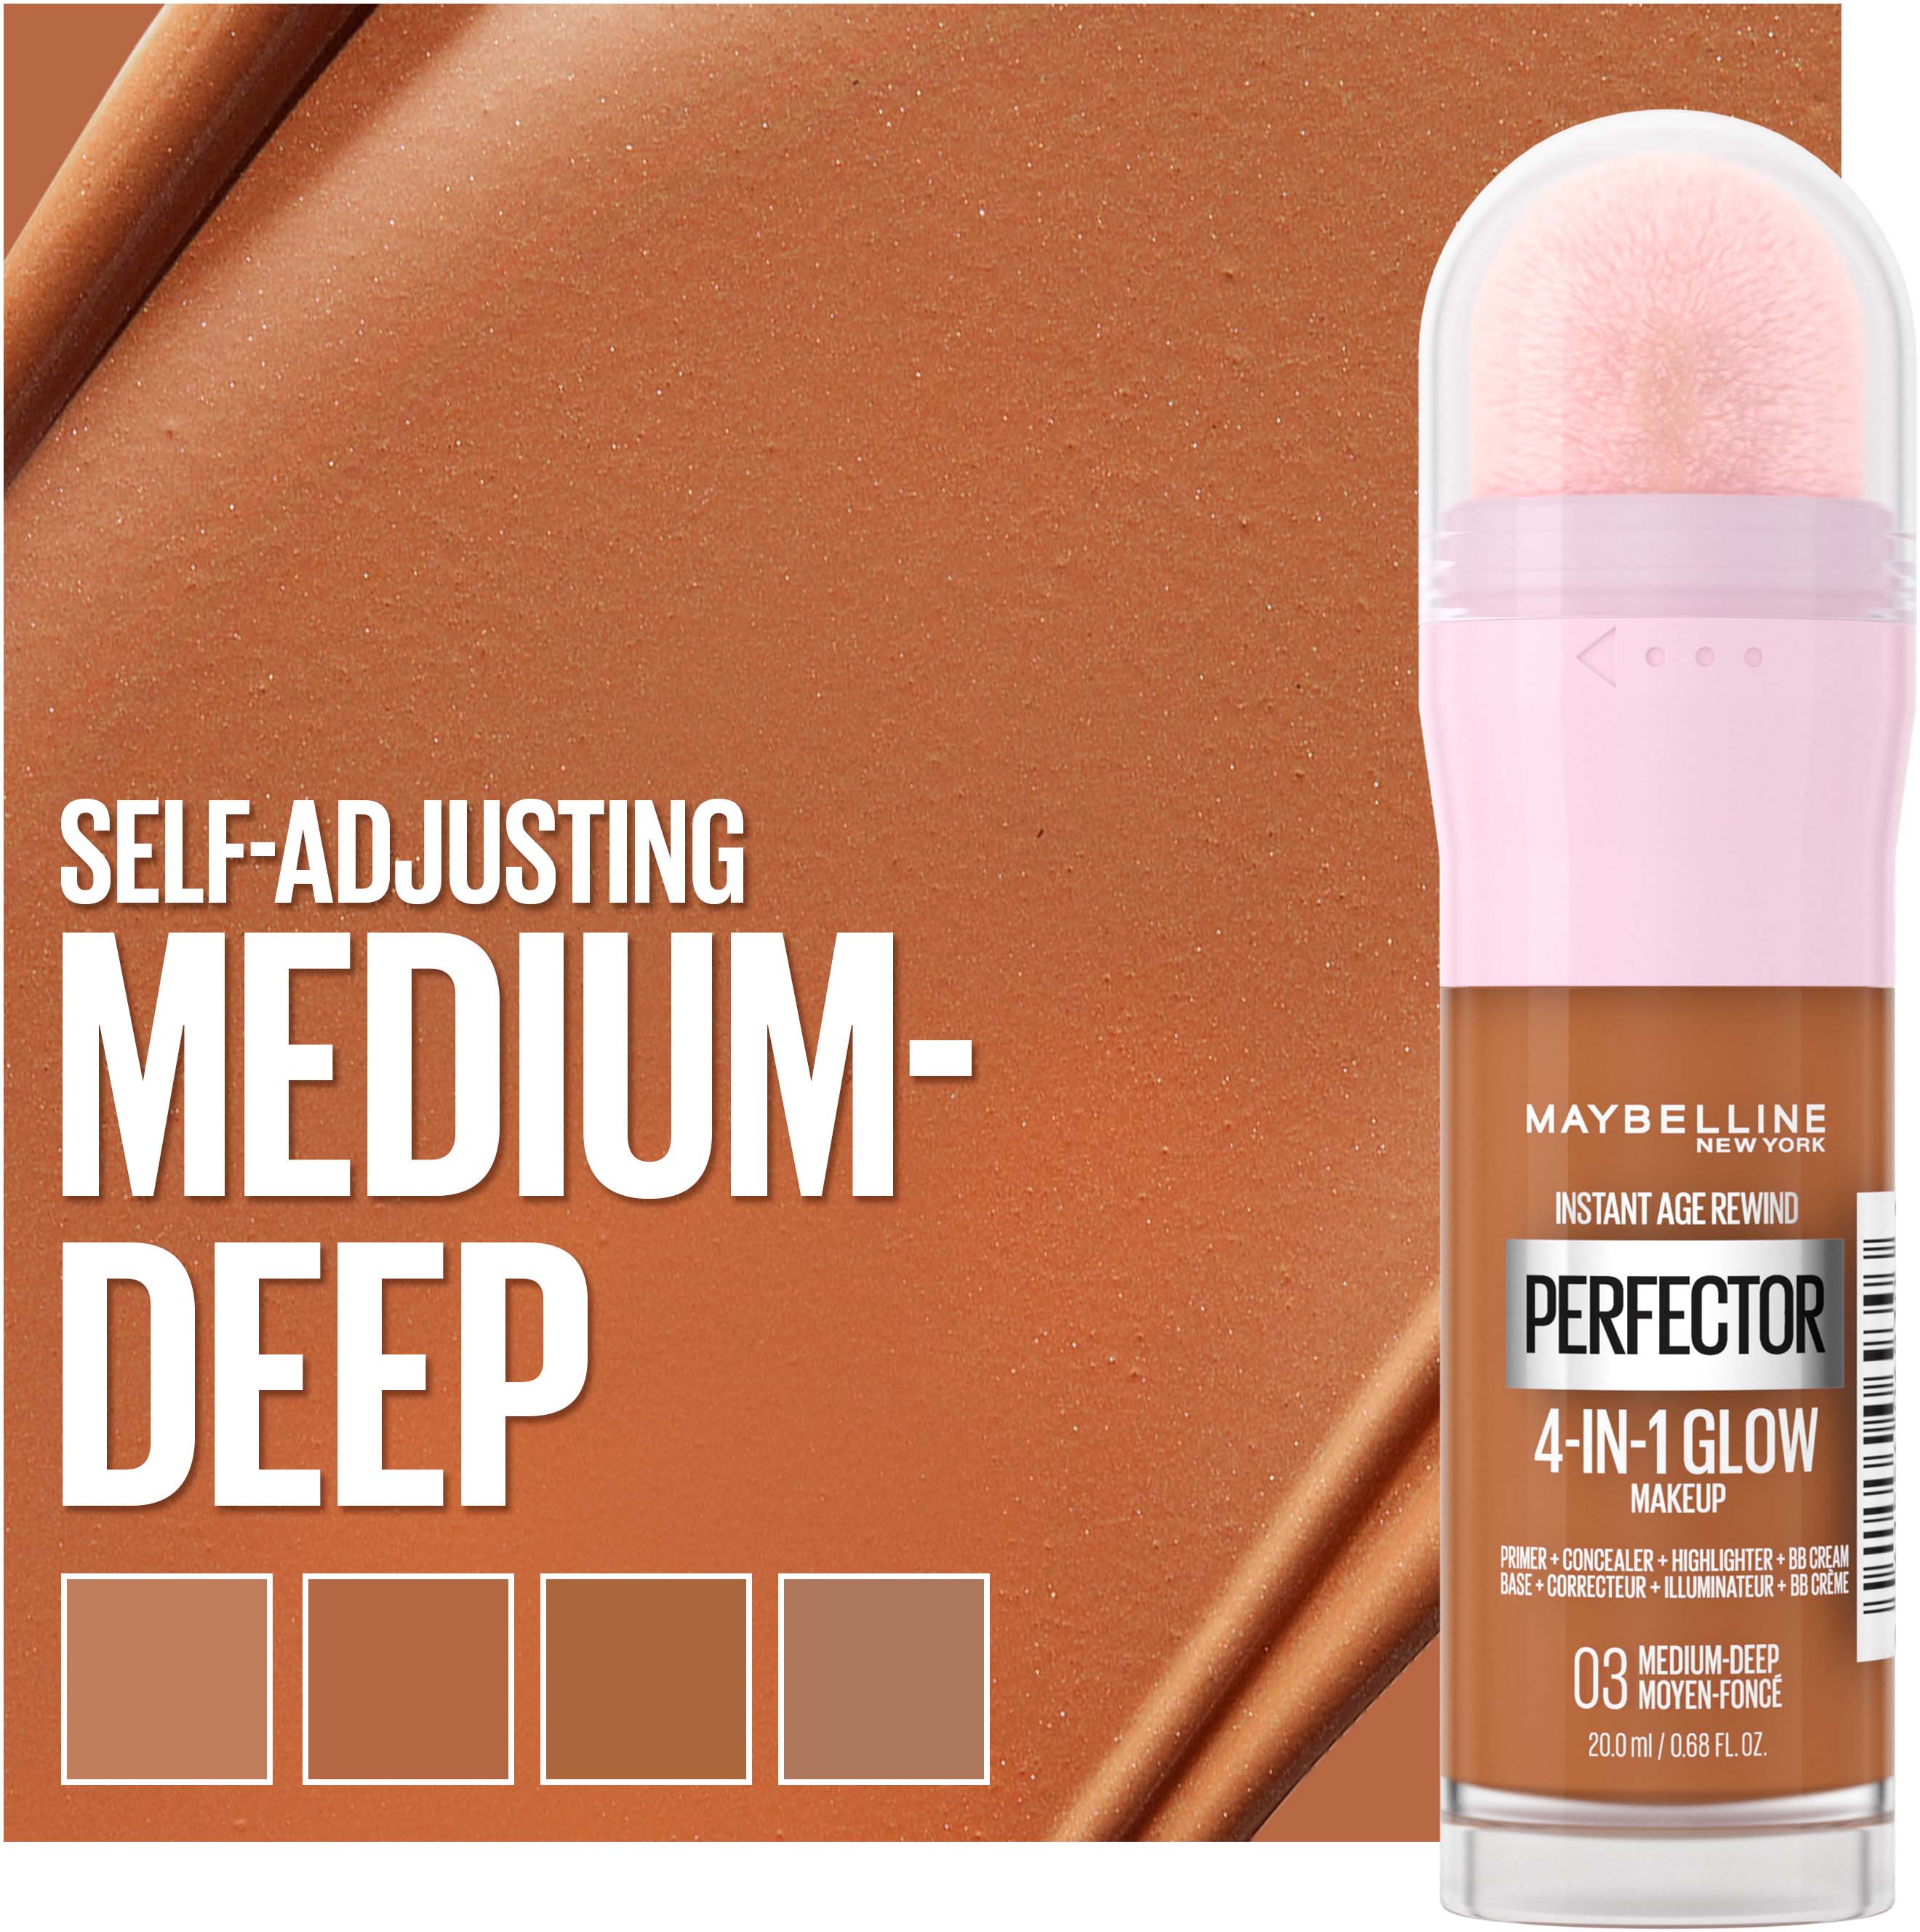 New Deep 03 Glow Makeup Perfector Maybelline Instant 4-in-1 York Medium Anti-Age